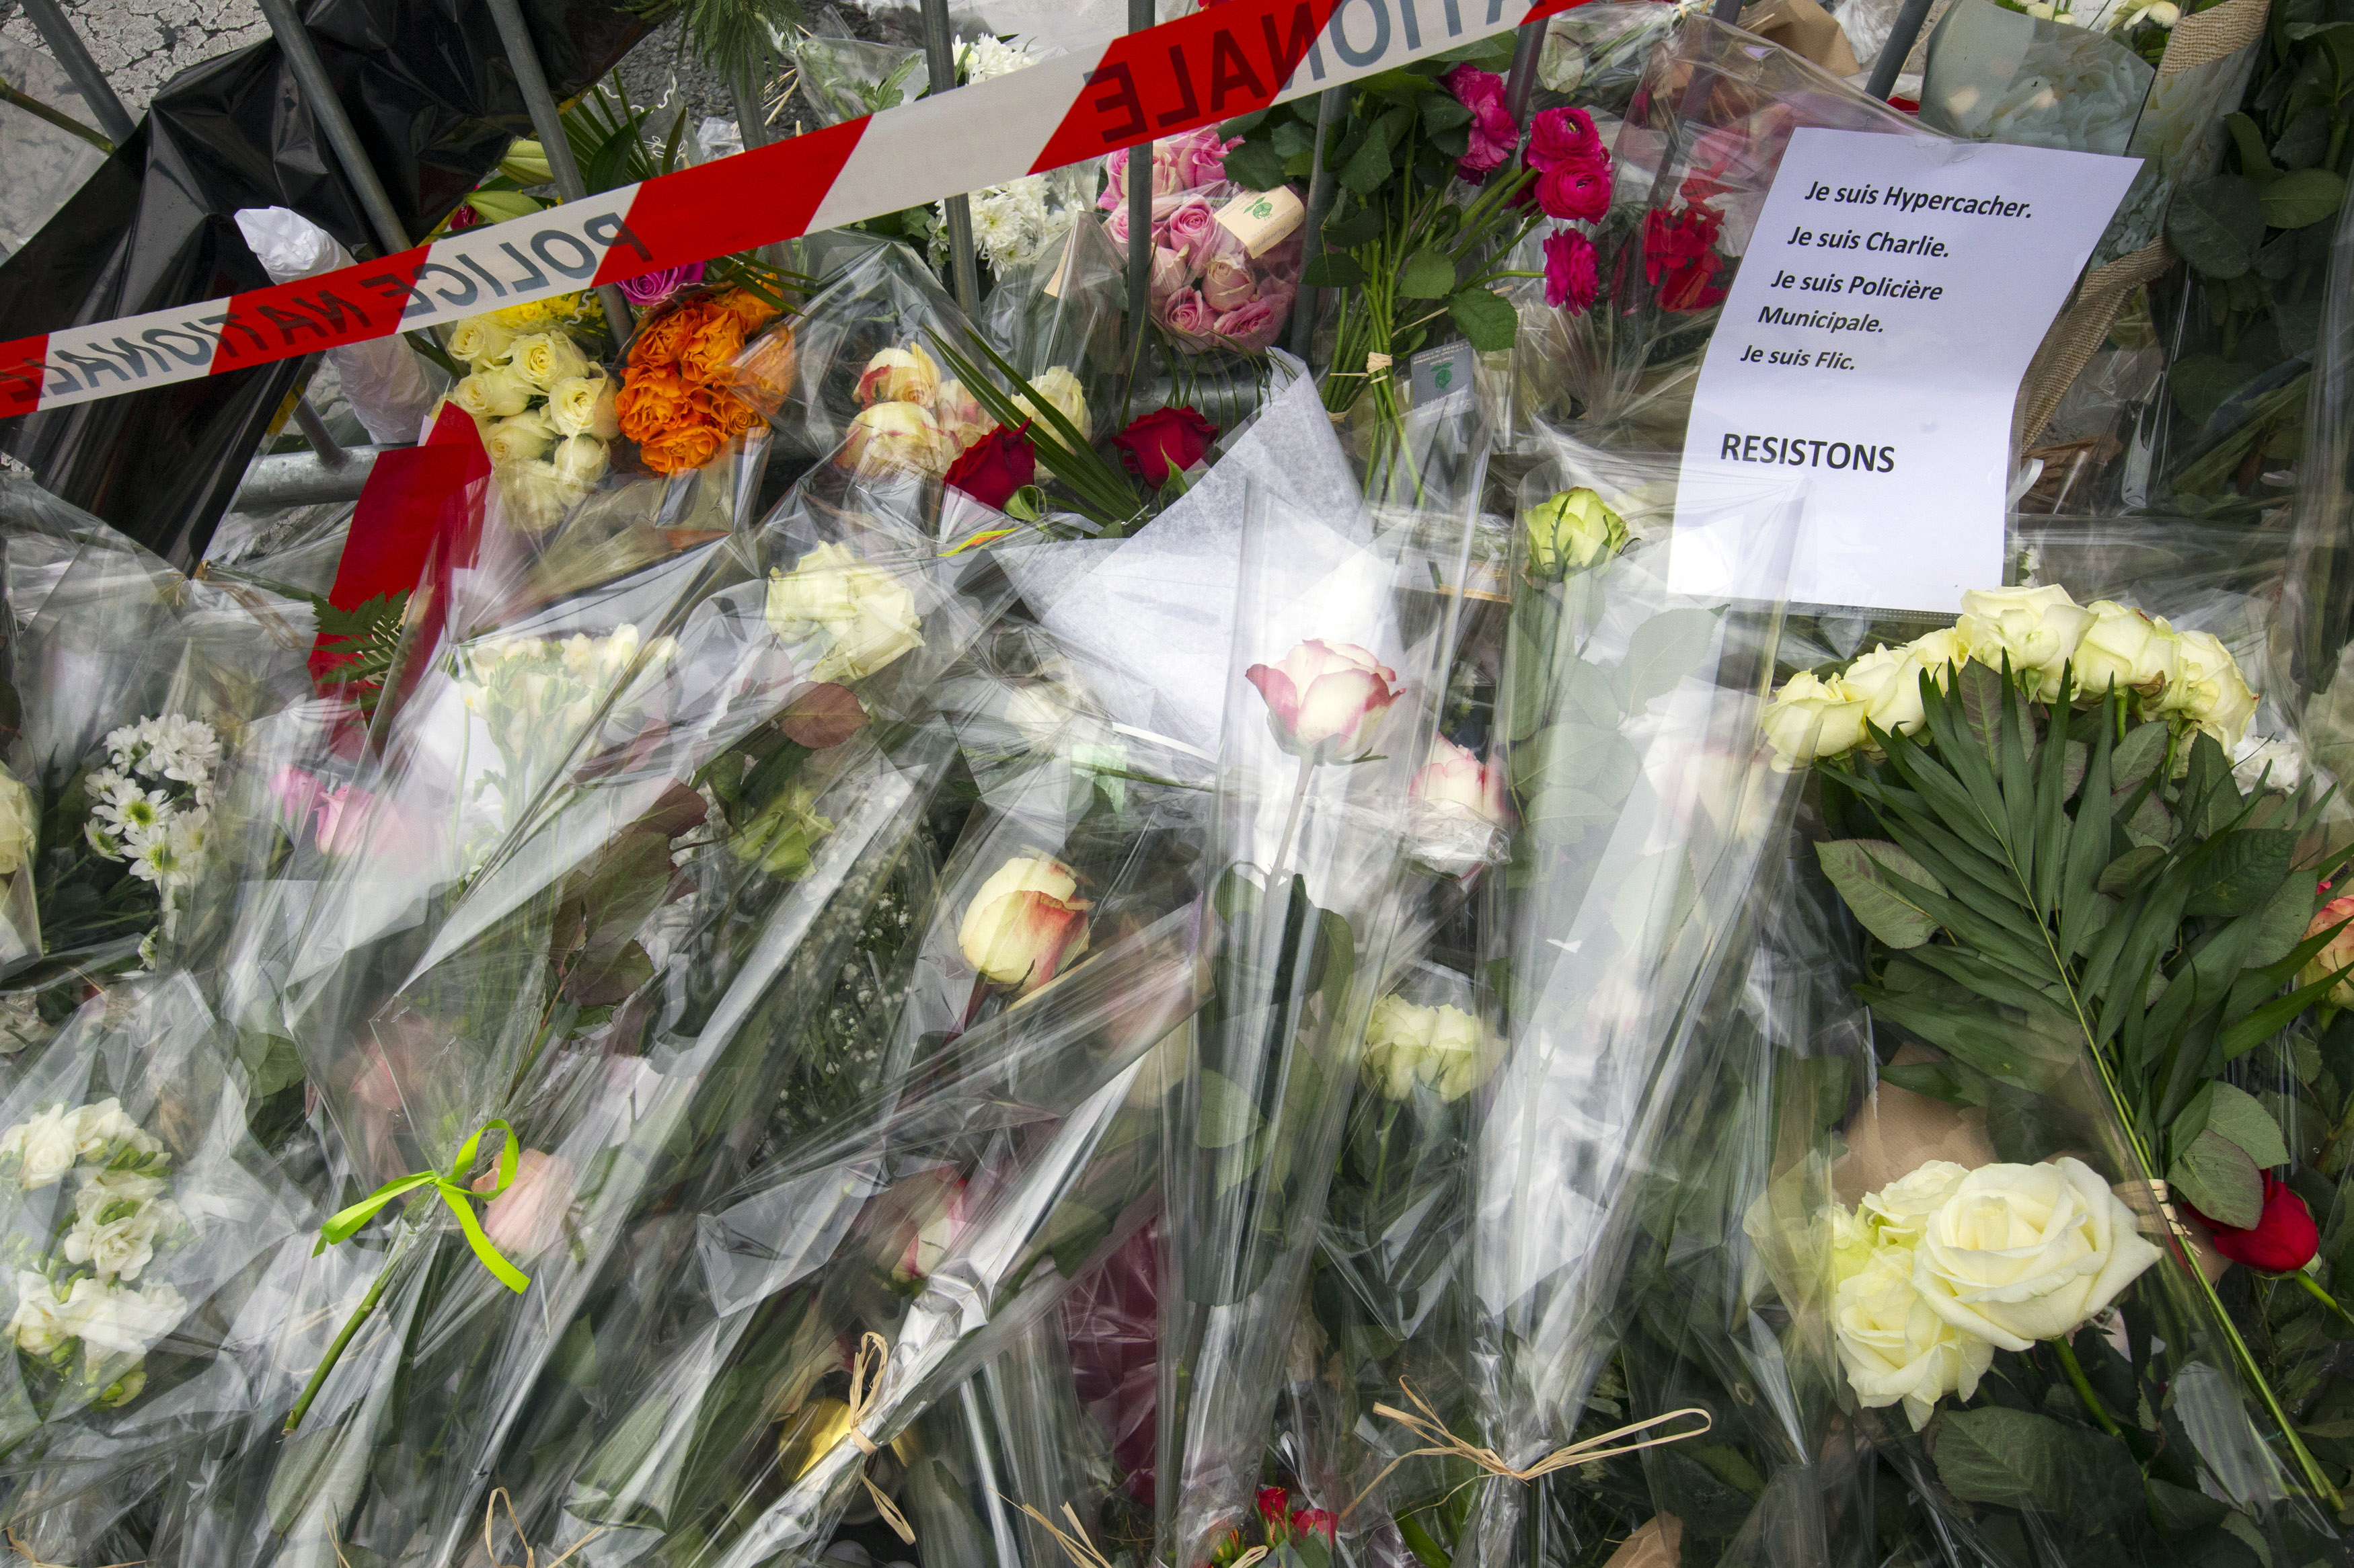 A sign reading "I am Hypercacher, I am Charlie and I am police officer, we must resist" is placed among flowers outside the Hyper Cacher kosher supermarket near Porte de Vincennes in eastern Paris, on Jan. 10, 2015. (Yves Herman—Reuters)